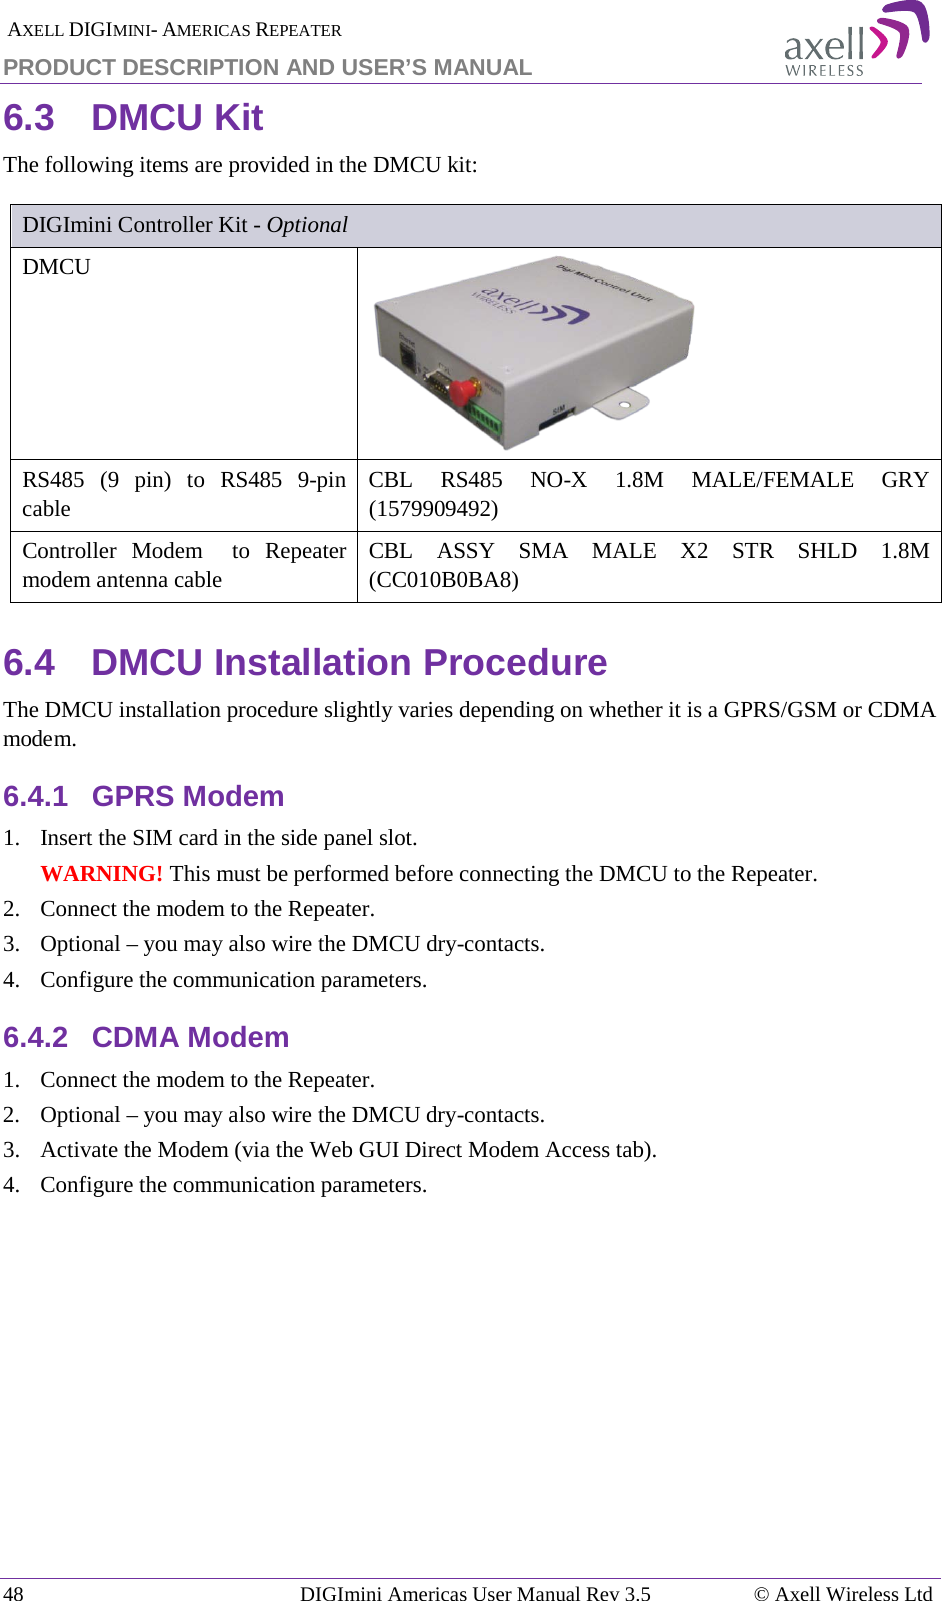  AXELL DIGIMINI- AMERICAS REPEATER PRODUCT DESCRIPTION AND USER’S MANUAL 48   DIGImini Americas User Manual Rev 3.5  © Axell Wireless Ltd 6.3  DMCU Kit The following items are provided in the DMCU kit:  DIGImini Controller Kit - Optional DMCU   RS485  (9 pin) to RS485  9-pin cable CBL  RS485  NO-X 1.8M MALE/FEMALE GRY (1579909492) Controller Modem  to Repeater modem antenna cable CBL ASSY SMA MALE X2 STR SHLD 1.8M (CC010B0BA8) 6.4  DMCU Installation Procedure The DMCU installation procedure slightly varies depending on whether it is a GPRS/GSM or CDMA modem. 6.4.1  GPRS Modem 1.  Insert the SIM card in the side panel slot. WARNING! This must be performed before connecting the DMCU to the Repeater. 2.  Connect the modem to the Repeater. 3.  Optional – you may also wire the DMCU dry-contacts. 4.  Configure the communication parameters. 6.4.2  CDMA Modem 1.  Connect the modem to the Repeater. 2.  Optional – you may also wire the DMCU dry-contacts. 3.  Activate the Modem (via the Web GUI Direct Modem Access tab).  4.  Configure the communication parameters.    